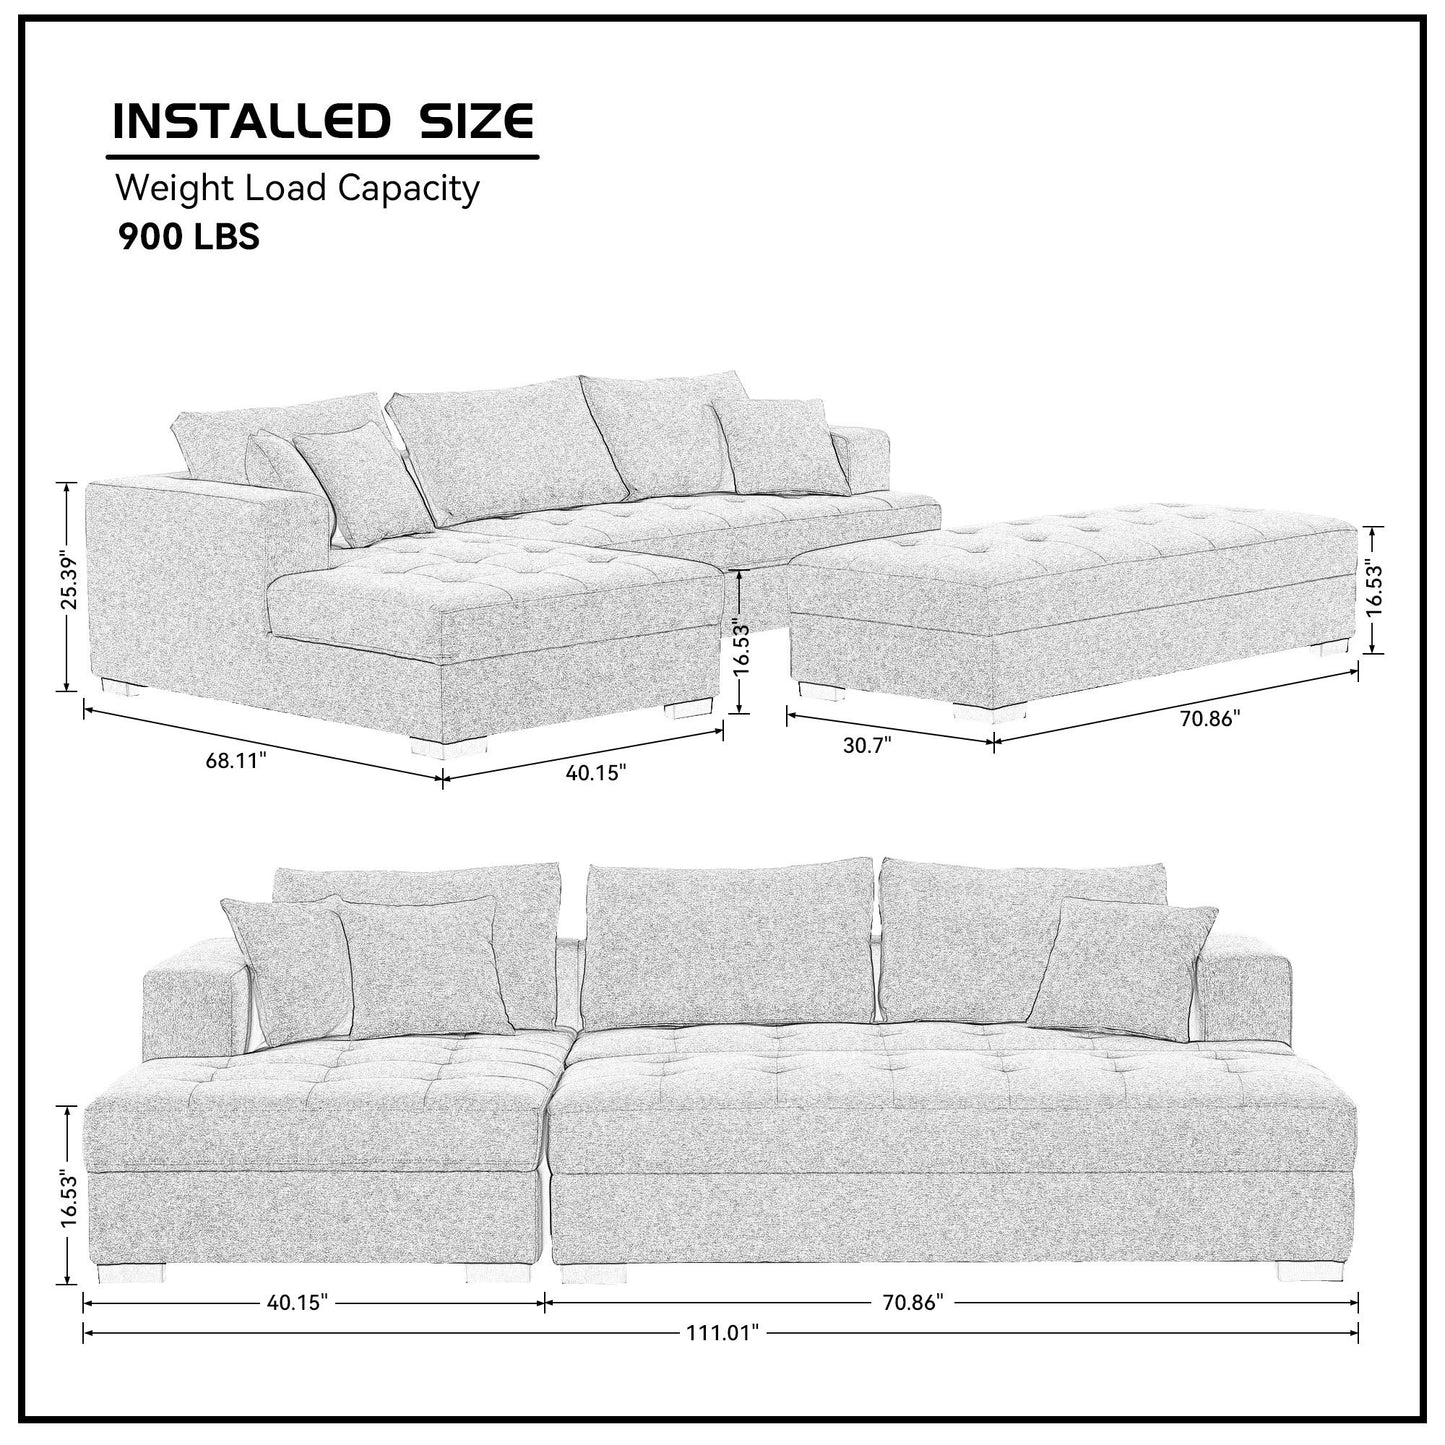 Tufted Fabric 3-Seat L-Shape Sectional Sofa Couch Set w/Chaise Lounge, Ottoman Coffee Table Bench, Light Grey